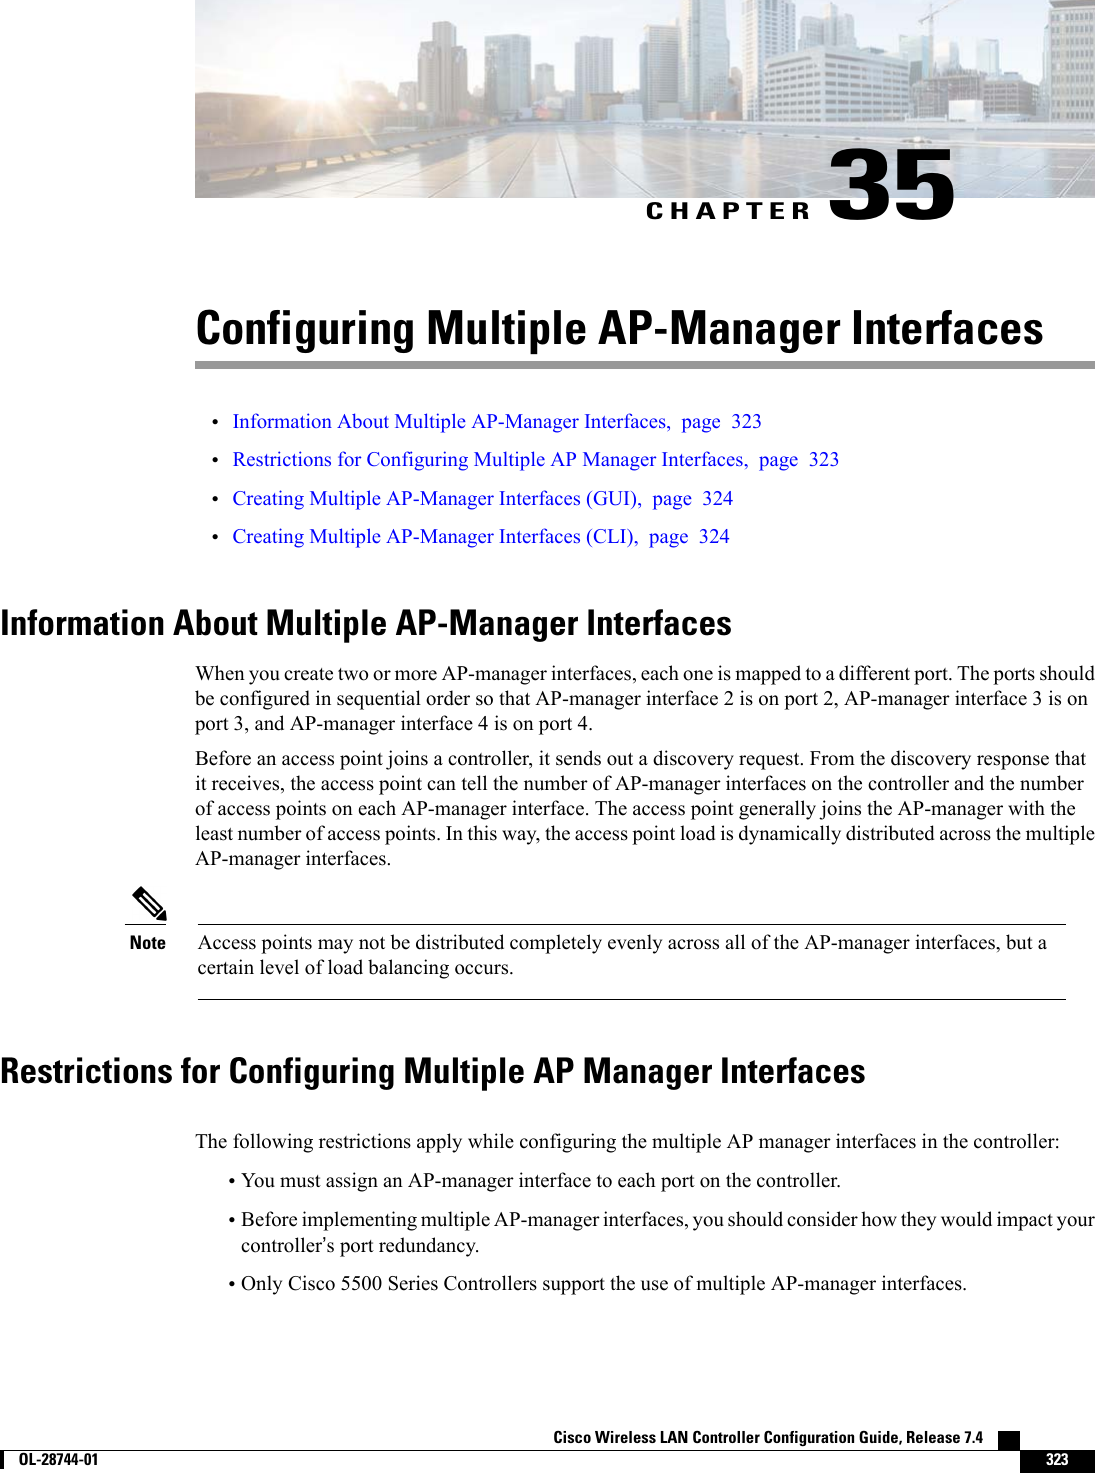 CHAPTER 35Configuring Multiple AP-Manager Interfaces•Information About Multiple AP-Manager Interfaces, page 323•Restrictions for Configuring Multiple AP Manager Interfaces, page 323•Creating Multiple AP-Manager Interfaces (GUI), page 324•Creating Multiple AP-Manager Interfaces (CLI), page 324Information About Multiple AP-Manager InterfacesWhen you create two or more AP-manager interfaces, each one is mapped to a different port. The ports shouldbe configured in sequential order so that AP-manager interface 2 is on port 2, AP-manager interface 3 is onport 3, and AP-manager interface 4 is on port 4.Before an access point joins a controller, it sends out a discovery request. From the discovery response thatit receives, the access point can tell the number of AP-manager interfaces on the controller and the numberof access points on each AP-manager interface. The access point generally joins the AP-manager with theleast number of access points. In this way, the access point load is dynamically distributed across the multipleAP-manager interfaces.Access points may not be distributed completely evenly across all of the AP-manager interfaces, but acertain level of load balancing occurs.NoteRestrictions for Configuring Multiple AP Manager InterfacesThe following restrictions apply while configuring the multiple AP manager interfaces in the controller:•You must assign an AP-manager interface to each port on the controller.•Before implementing multiple AP-manager interfaces, you should consider how they would impact yourcontroller’s port redundancy.•Only Cisco 5500 Series Controllers support the use of multiple AP-manager interfaces.Cisco Wireless LAN Controller Configuration Guide, Release 7.4        OL-28744-01 323